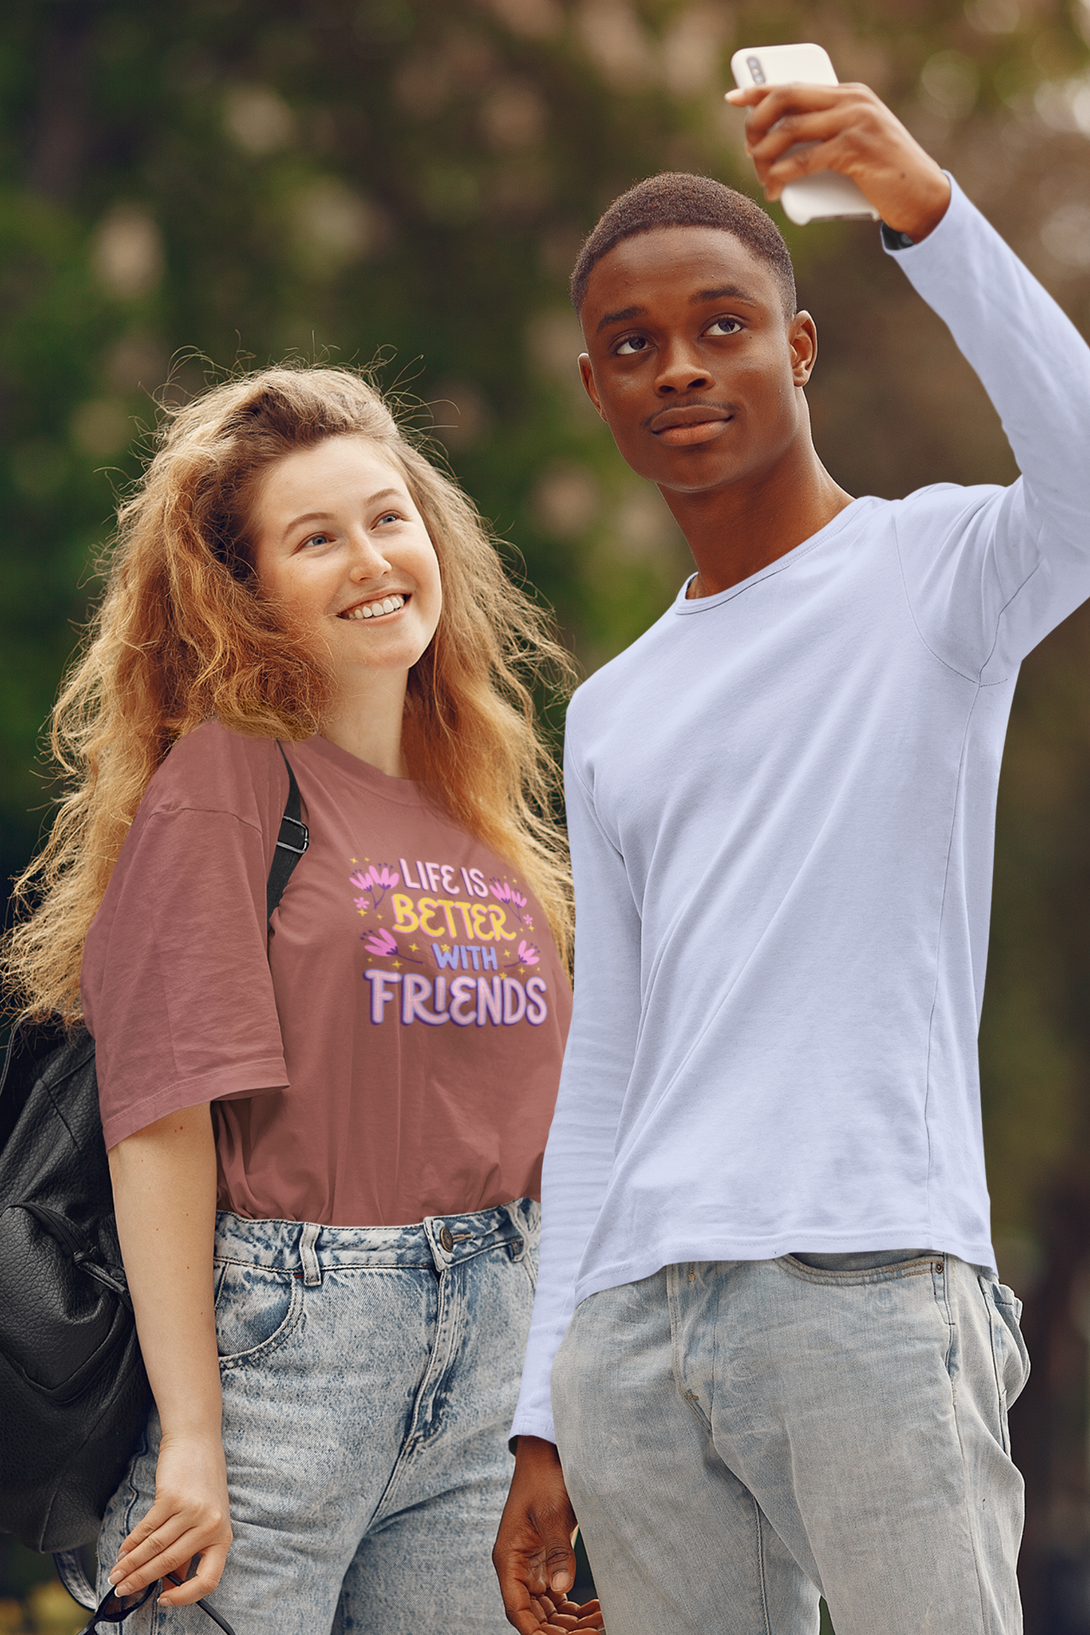 Life Is Better With Friends Printed Oversized T-Shirt For Women - WowWaves - 4